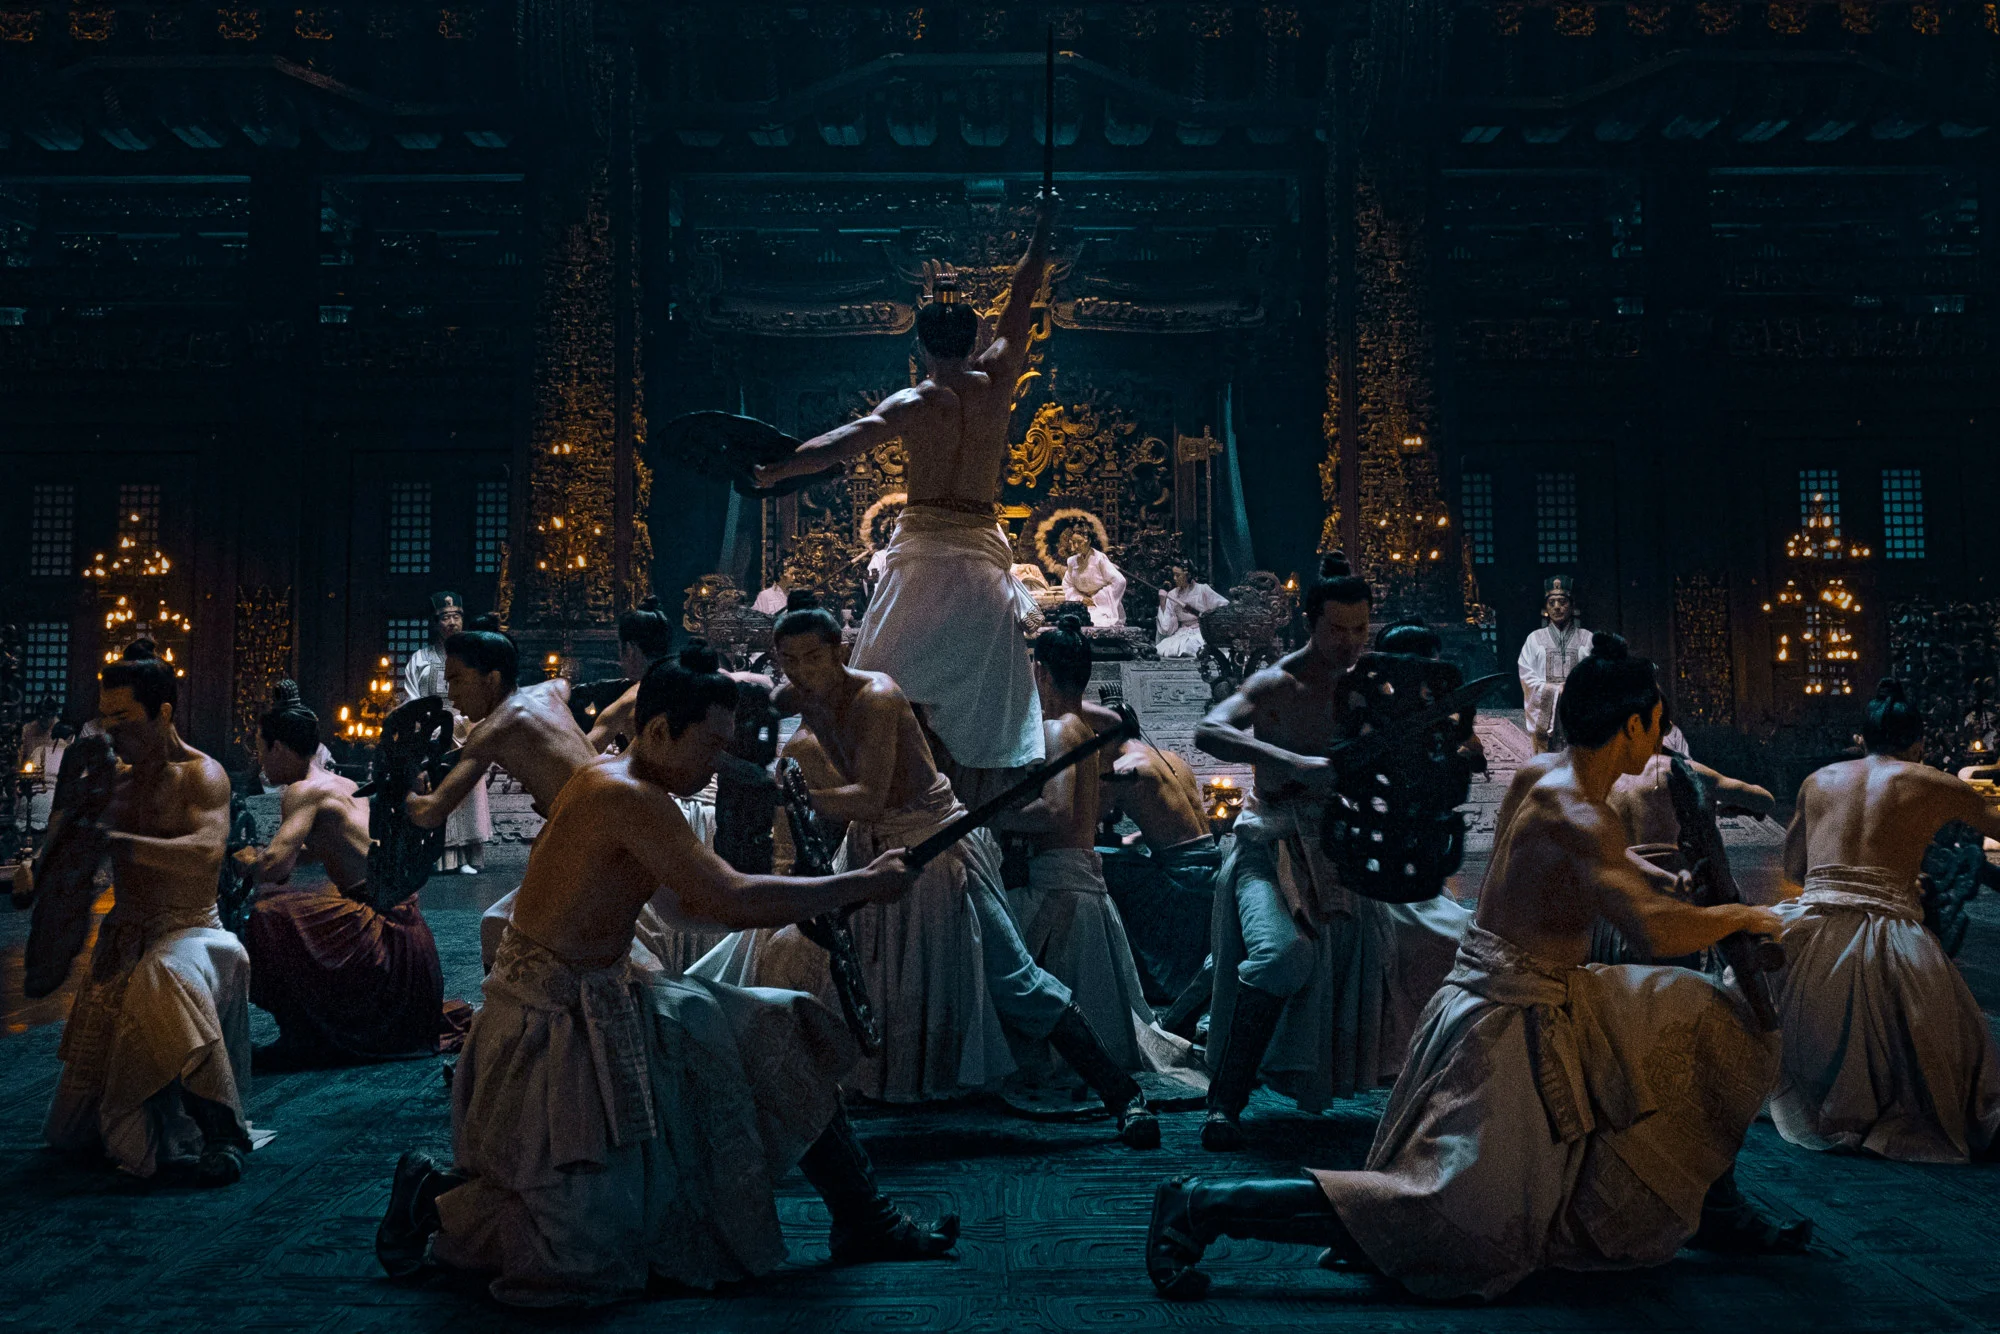 <p>Immerse yourself in the mythical world of ancient China as an immortal monk brings a divine scroll to the human realm to undo a kingdom’s cursed fate. With its rich mythology and stunning visuals, this film offers an epic tale of gods and mortals.</p>